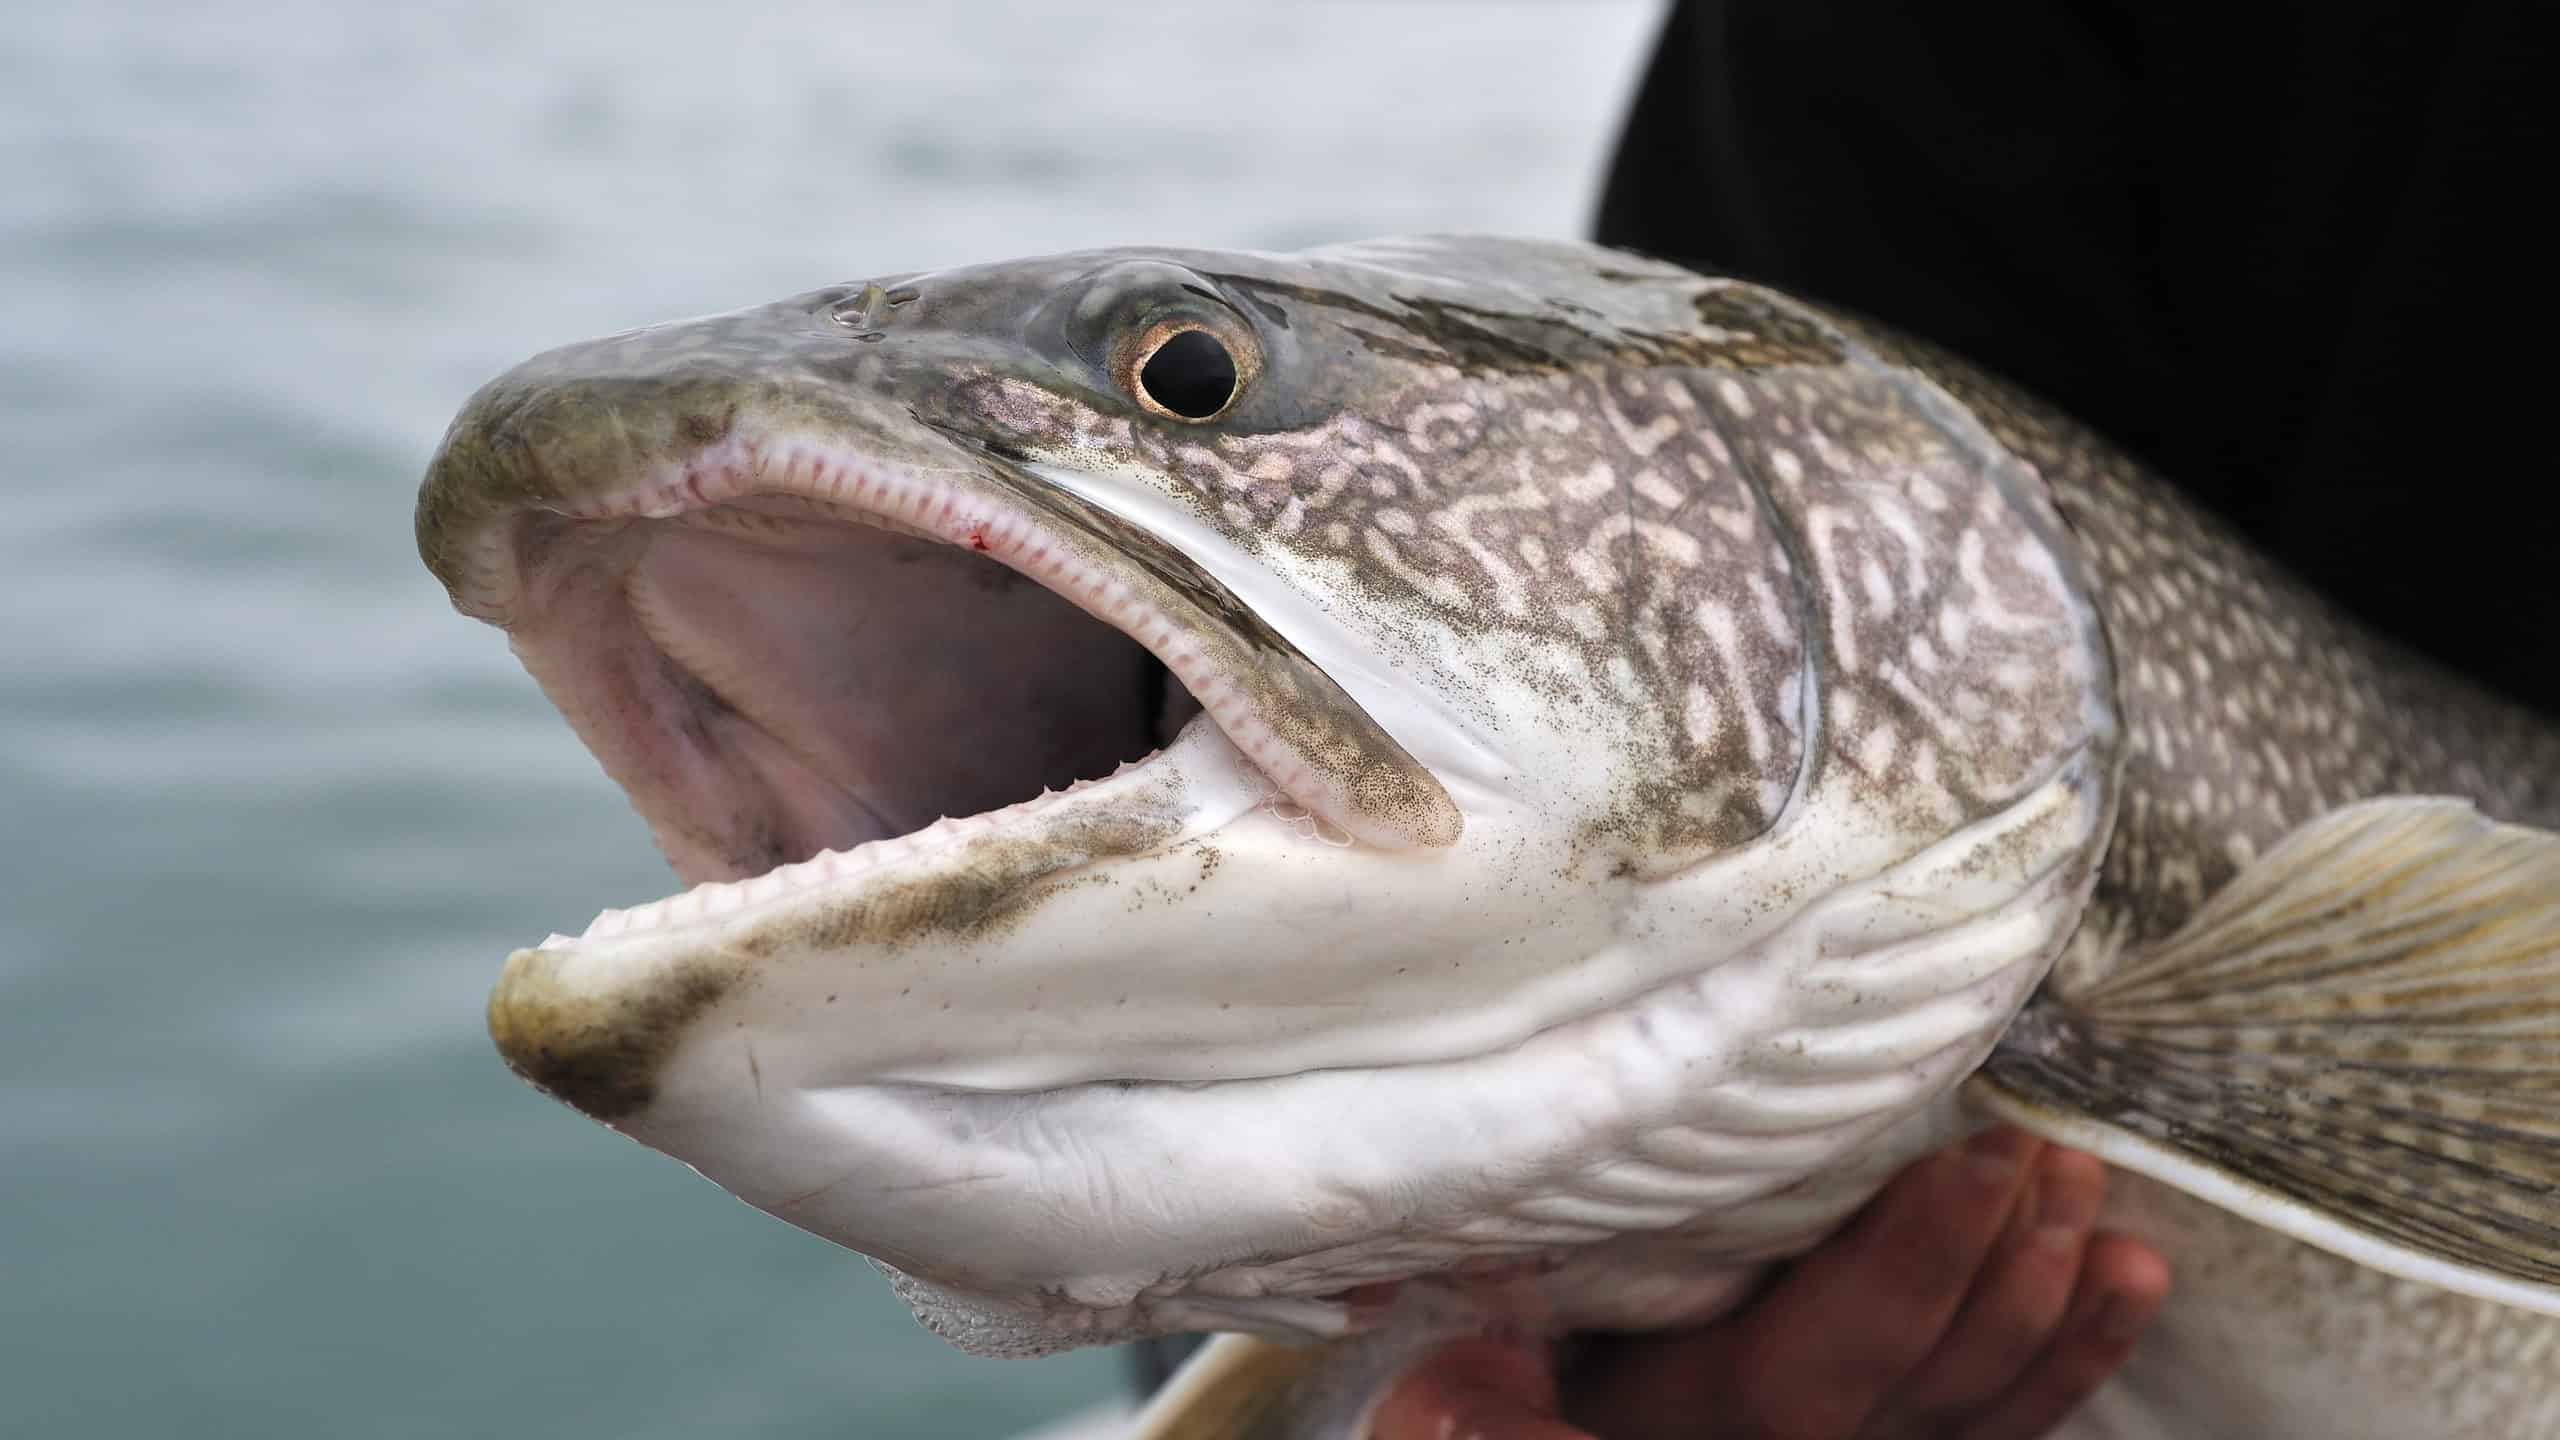 Closeup of a lake trout's head and mouth